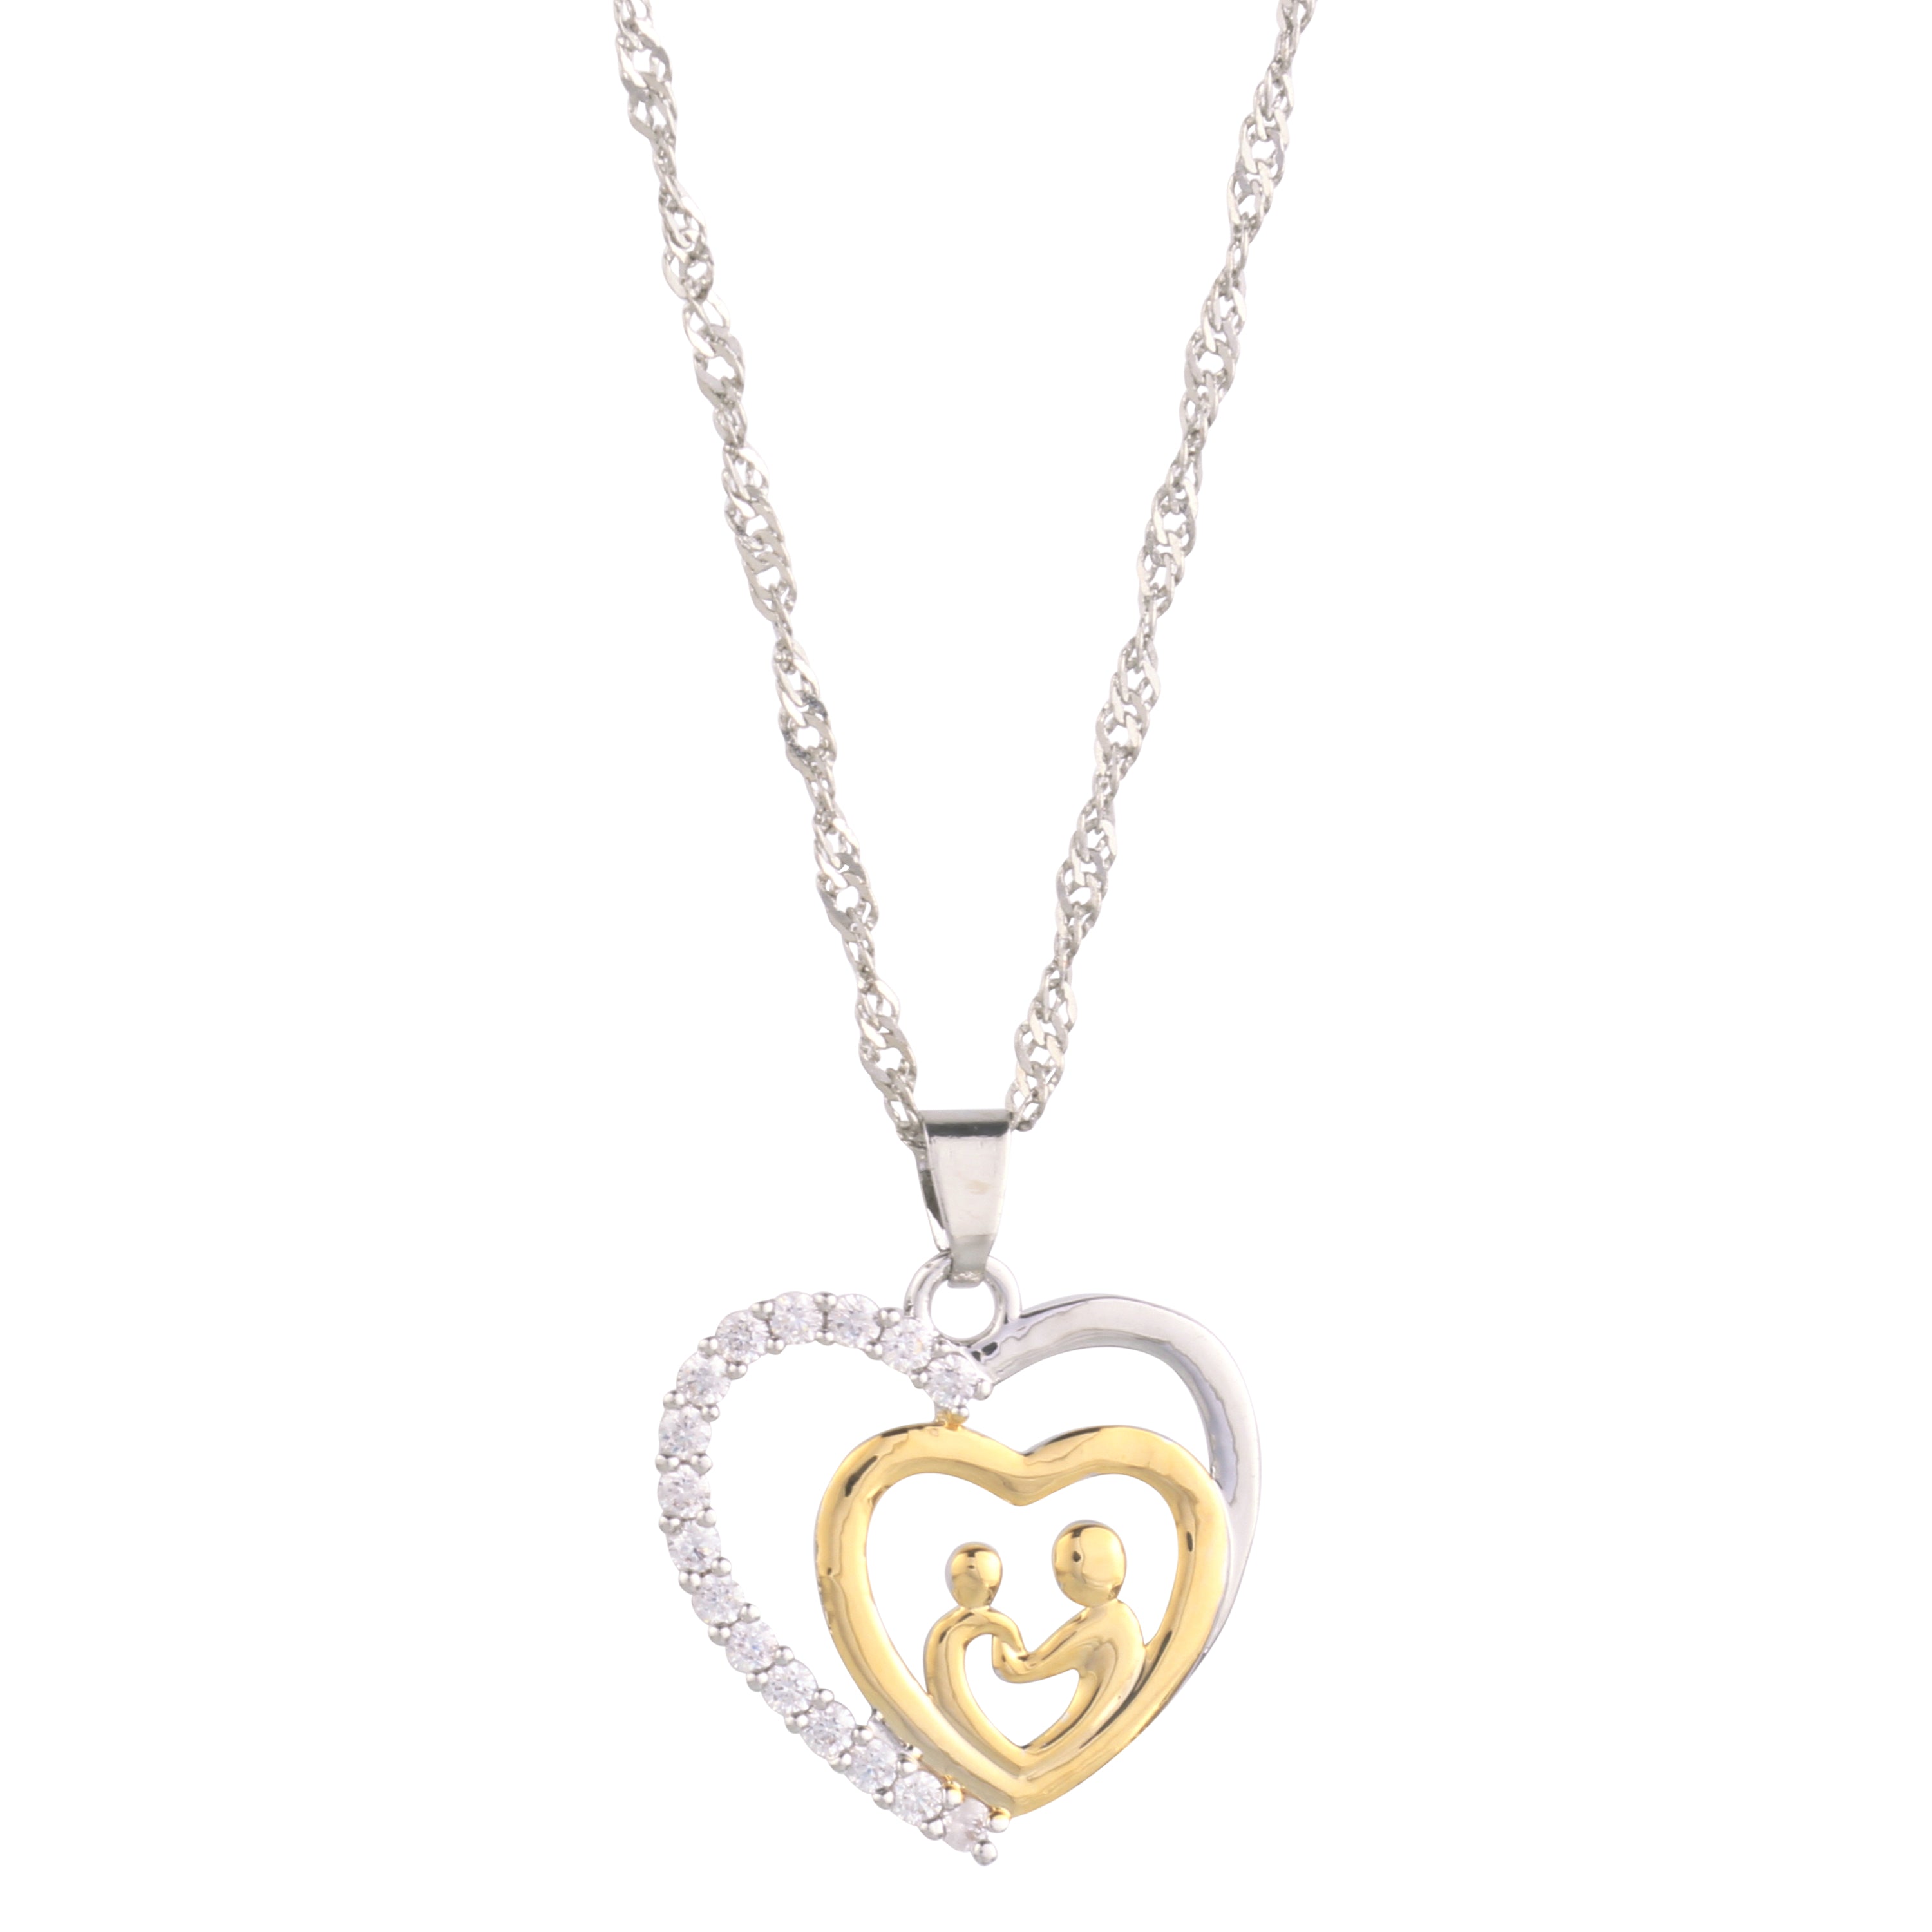 Mother and Child Pave Heart Pendant Necklace Nichestar